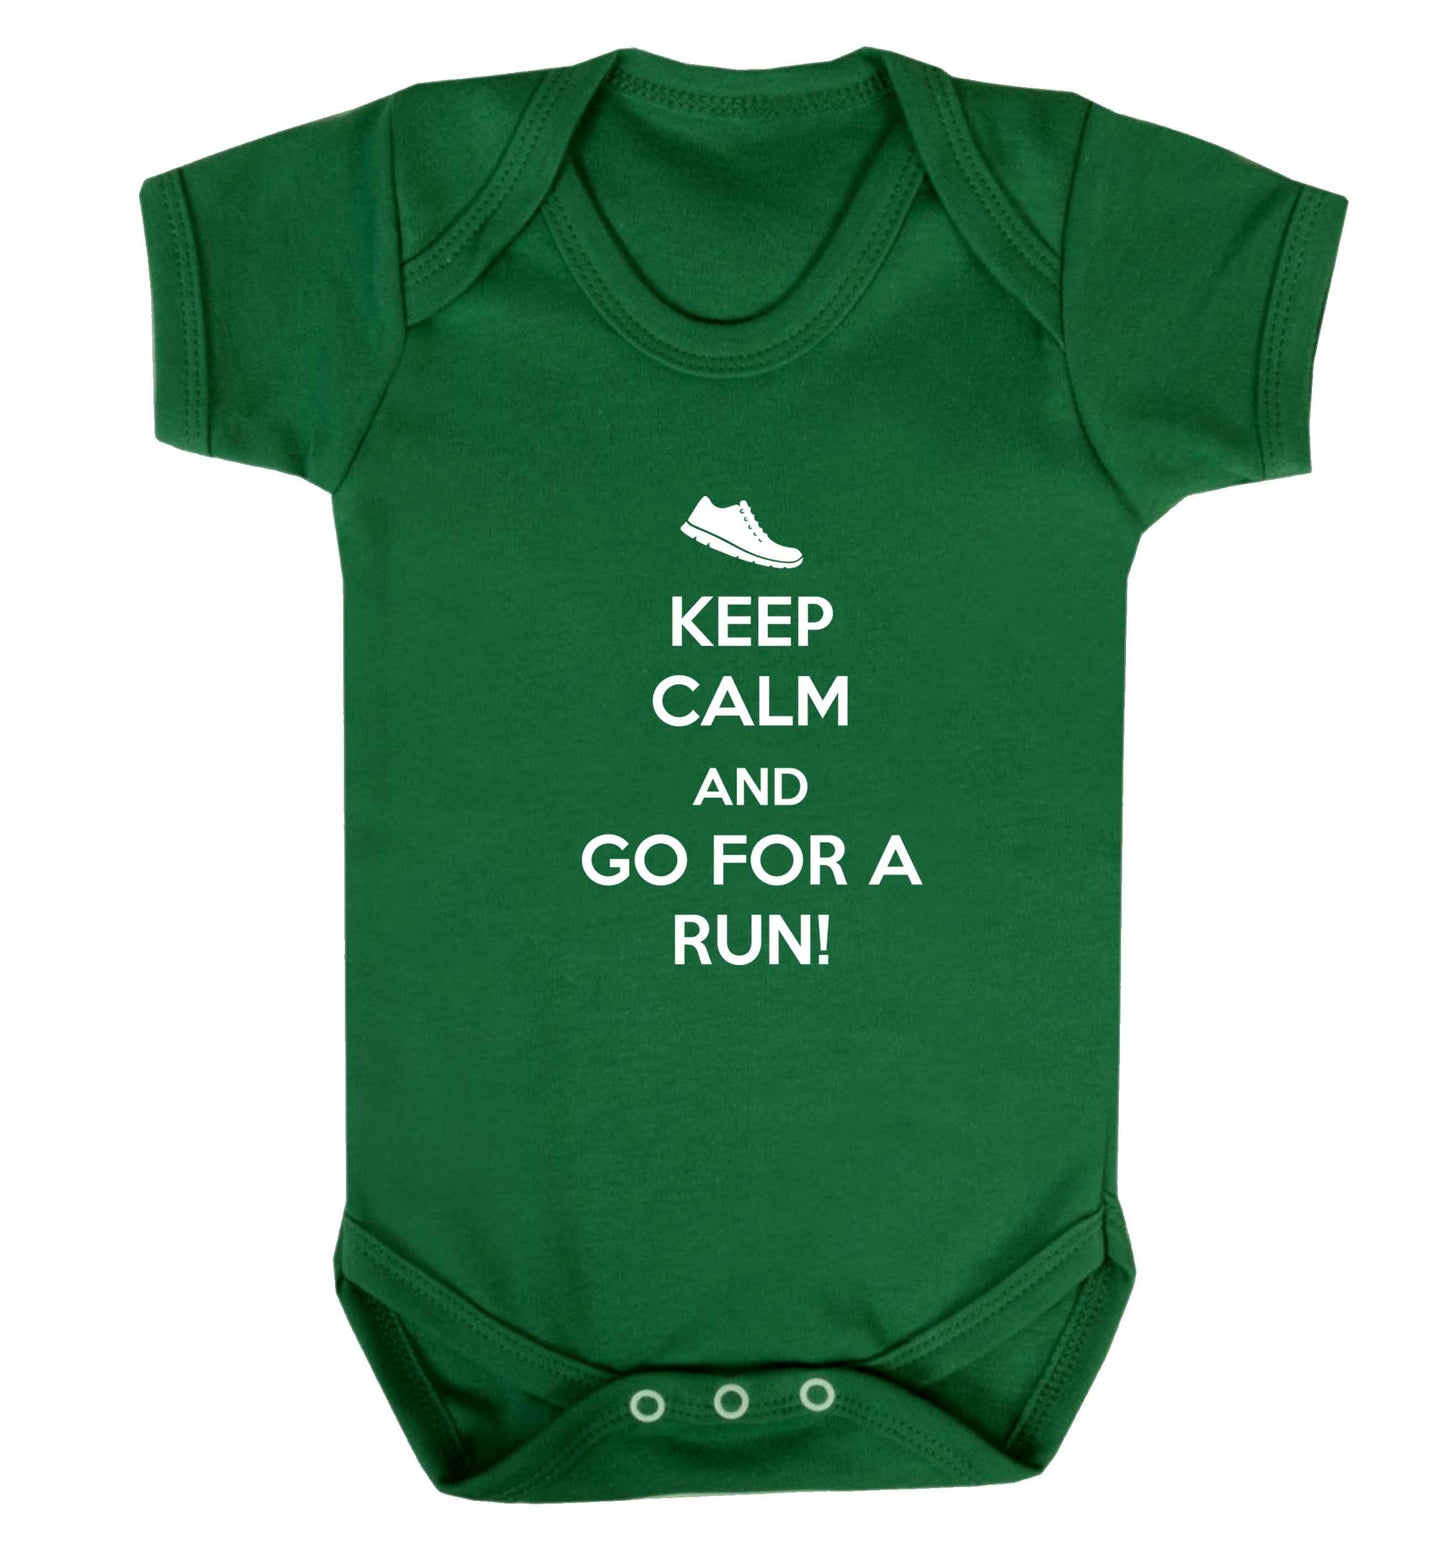 Keep calm and go for a run baby vest green 18-24 months